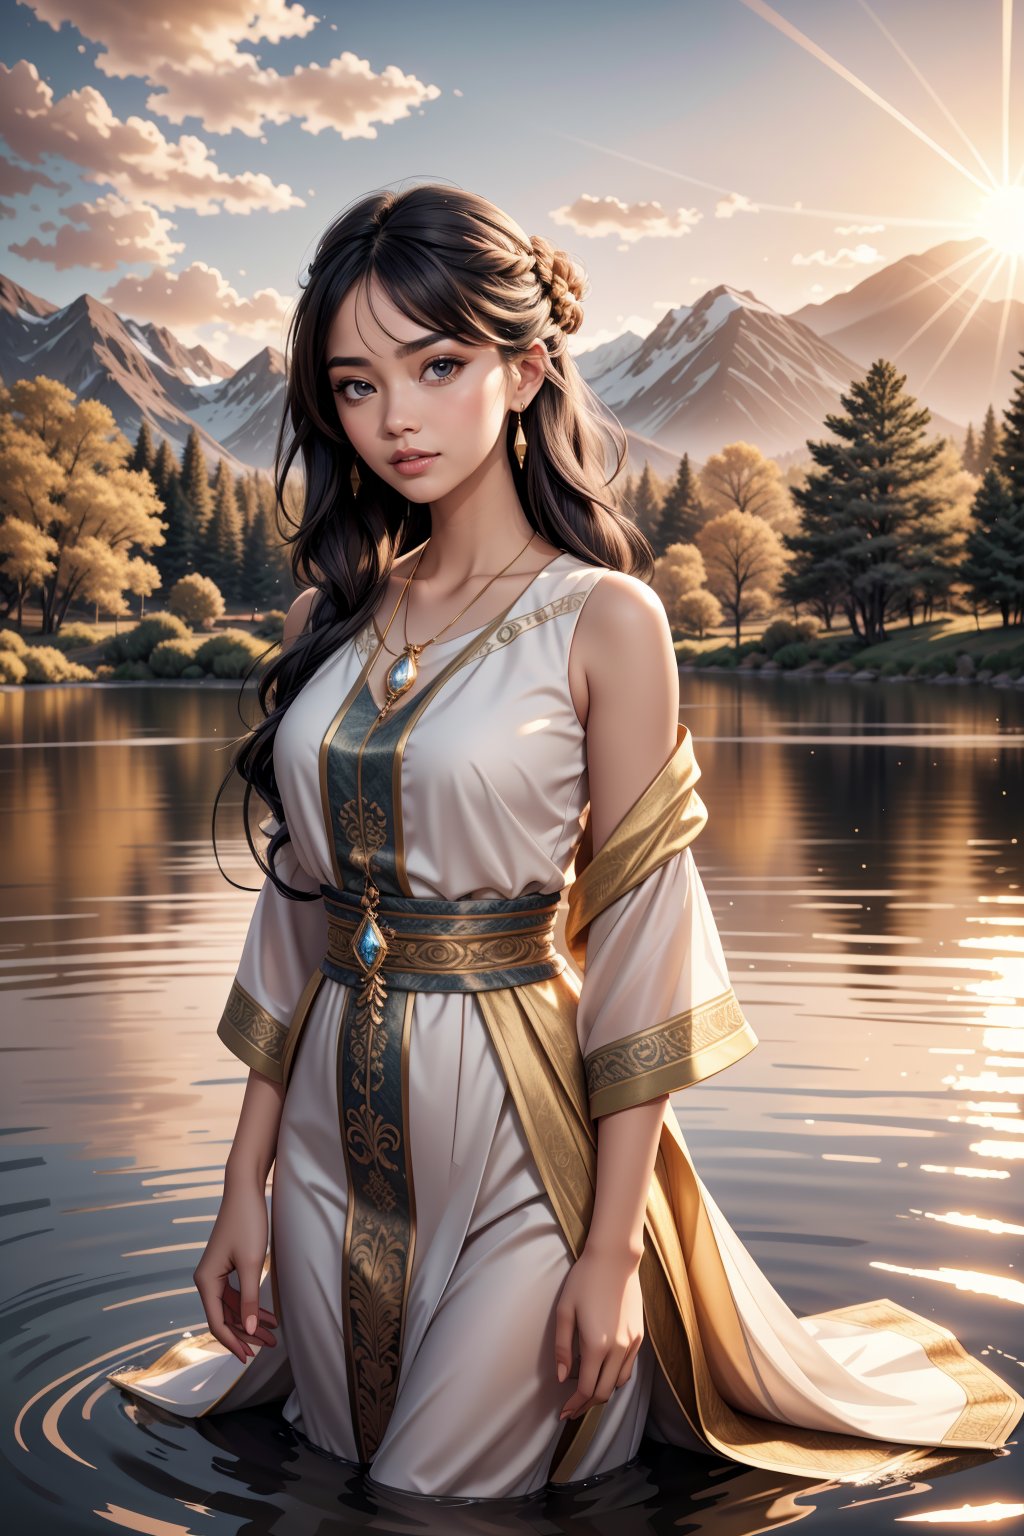 1 girl, serene expression, mesmerizing eyes, straight long hair, flowing dress, poised posture, porcelain skin, subtle blush, crystal pendant BREAK golden hour, (rim lighting) warm tones, sun flare, soft shadows, vibrant colors, painterly effect, dreamy atmosphere BREAK scenic lake, distant mountains, willow tree, calm water, reflection, sunlit clouds, peaceful ambiance, idyllic sunset, ultra detailed, official art, unity 8k wallpaper , zentangle,